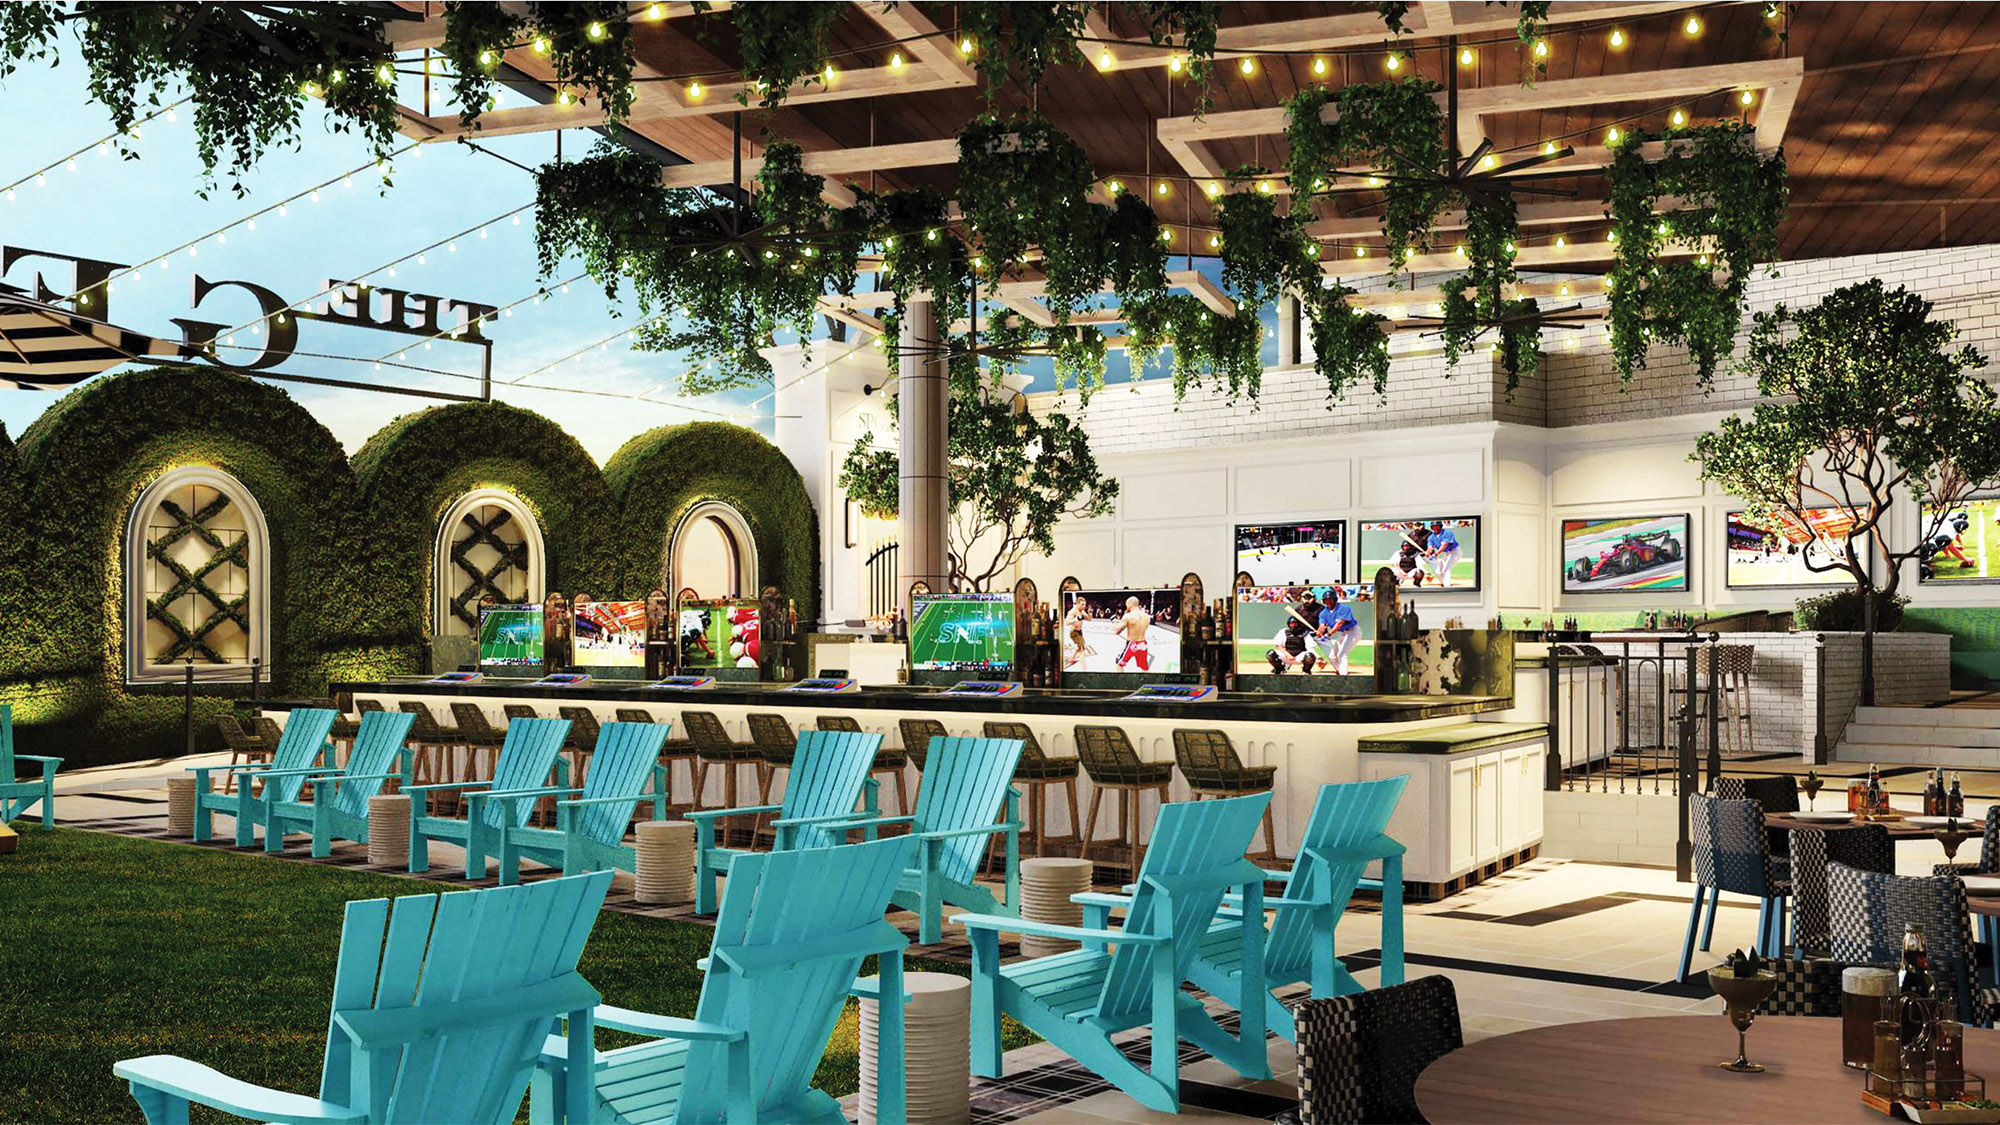 A rendering of the George Sportsmen's Lounge, which will feature live entertainment, bar-top gaming, patio parties, full-service dining and cocktails.